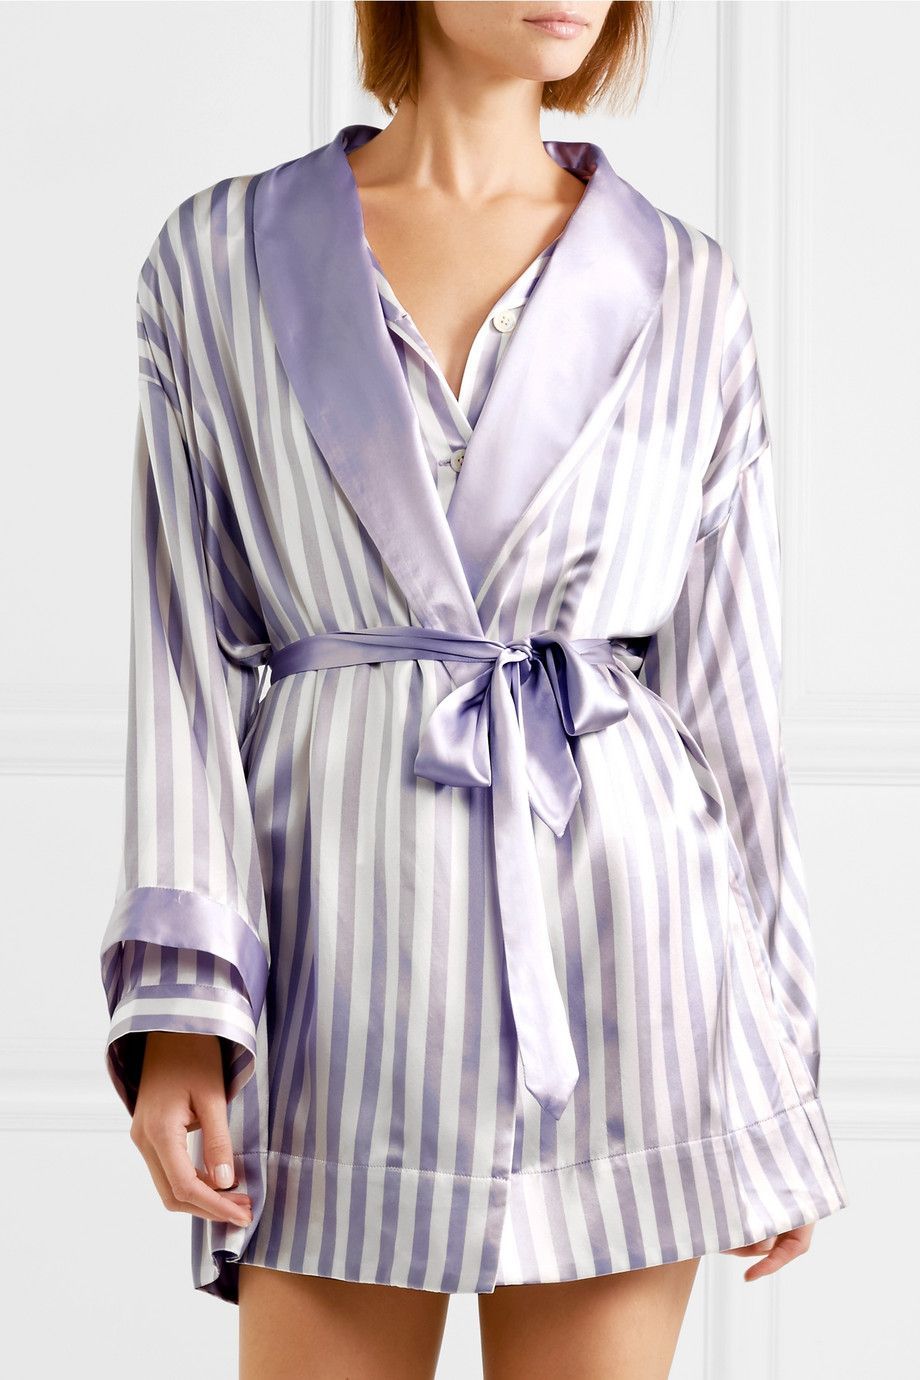 25 Silk Robes For The Ultimate Homebody